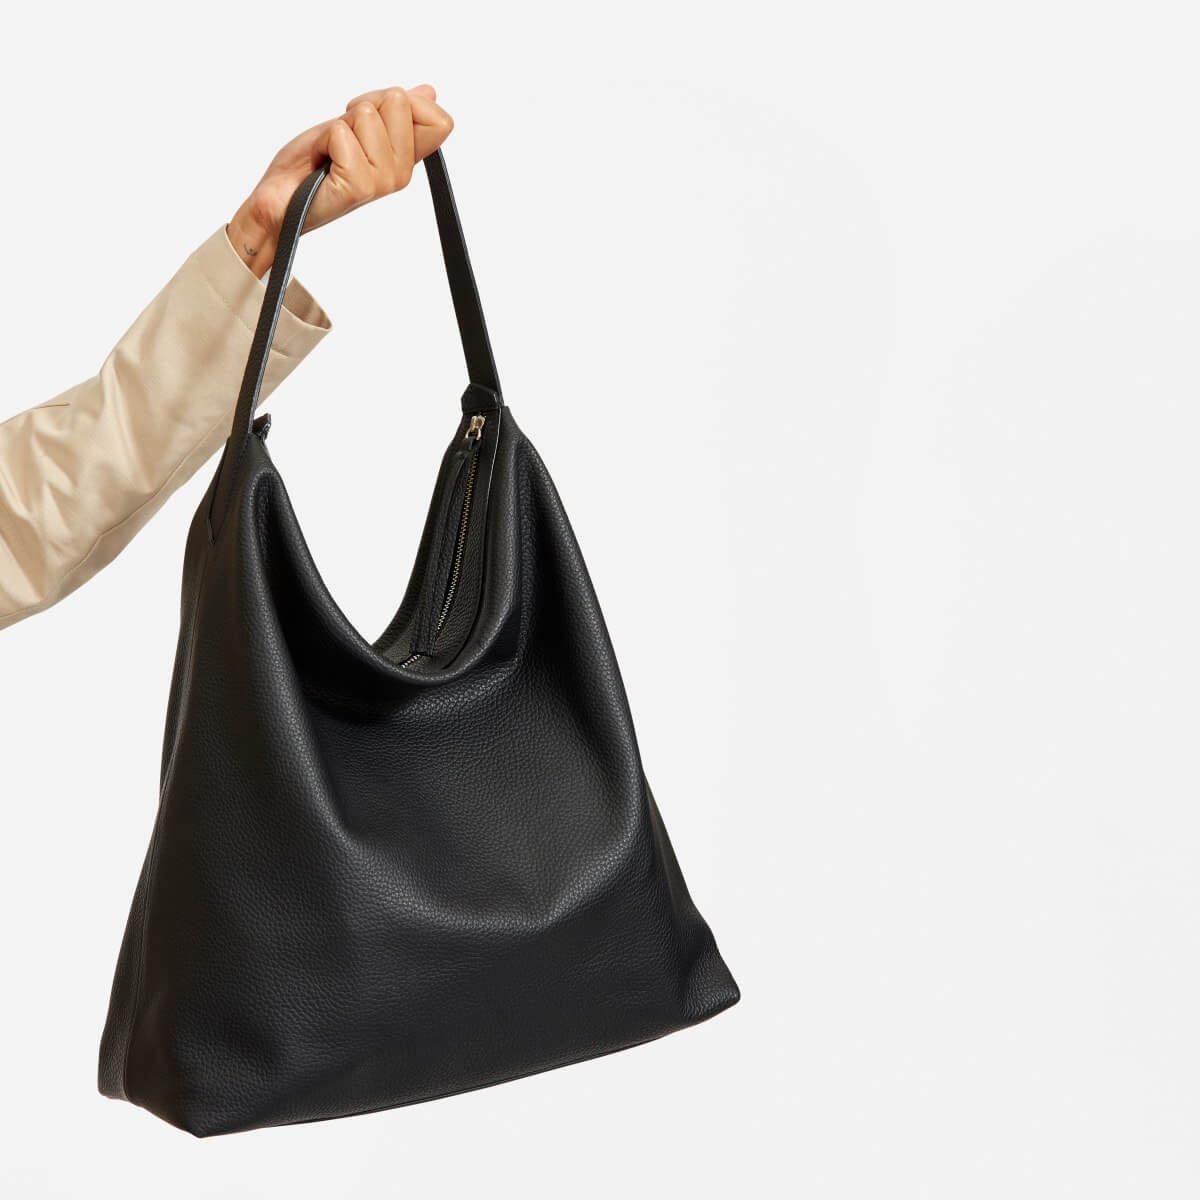 Everlane Boss Bag in black, a hobo leather bag, as held in someone's hand.